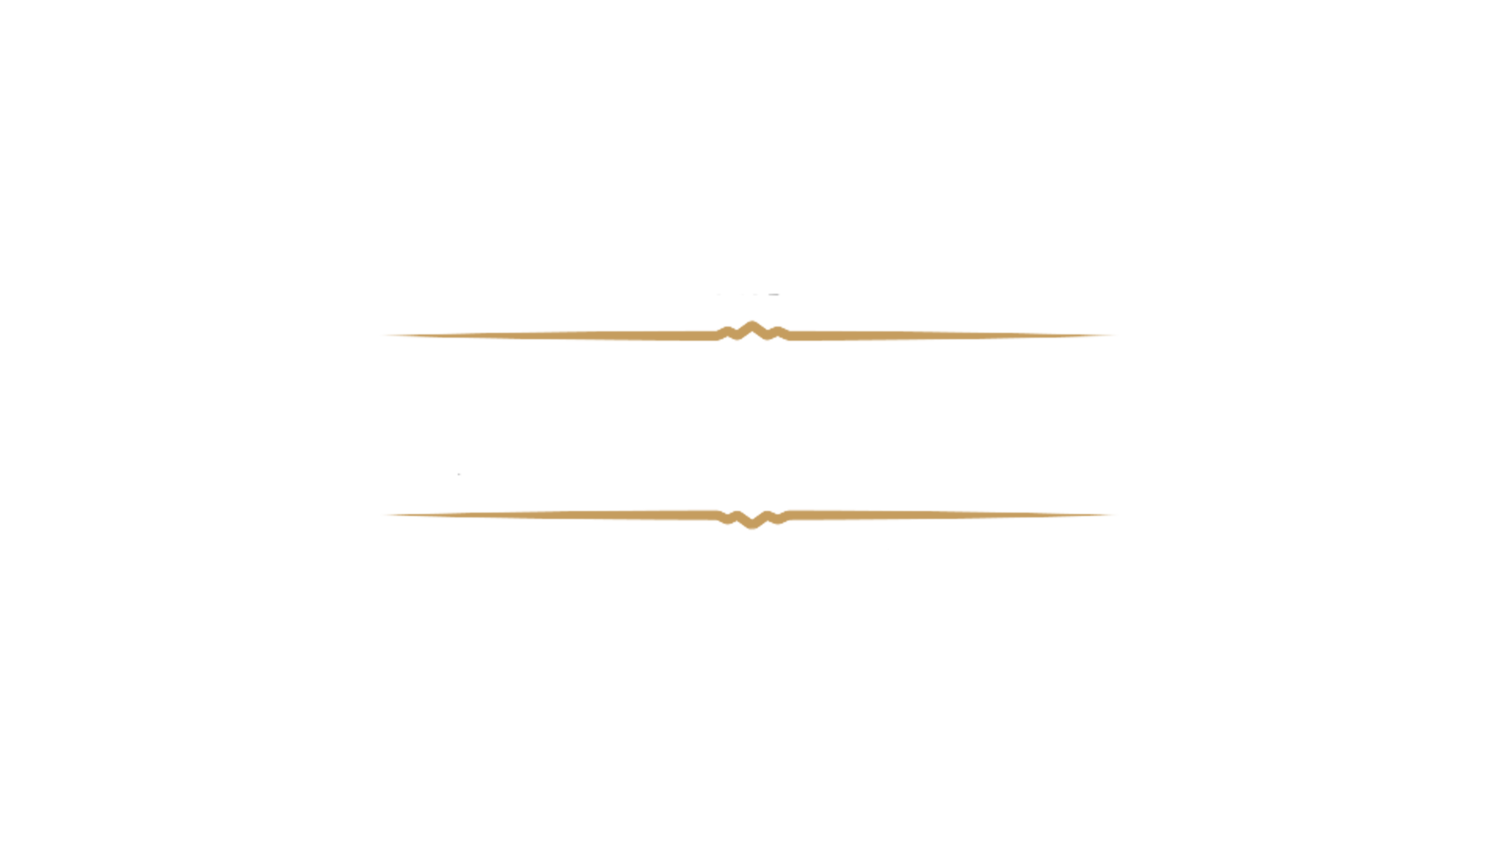 The Williams Arms